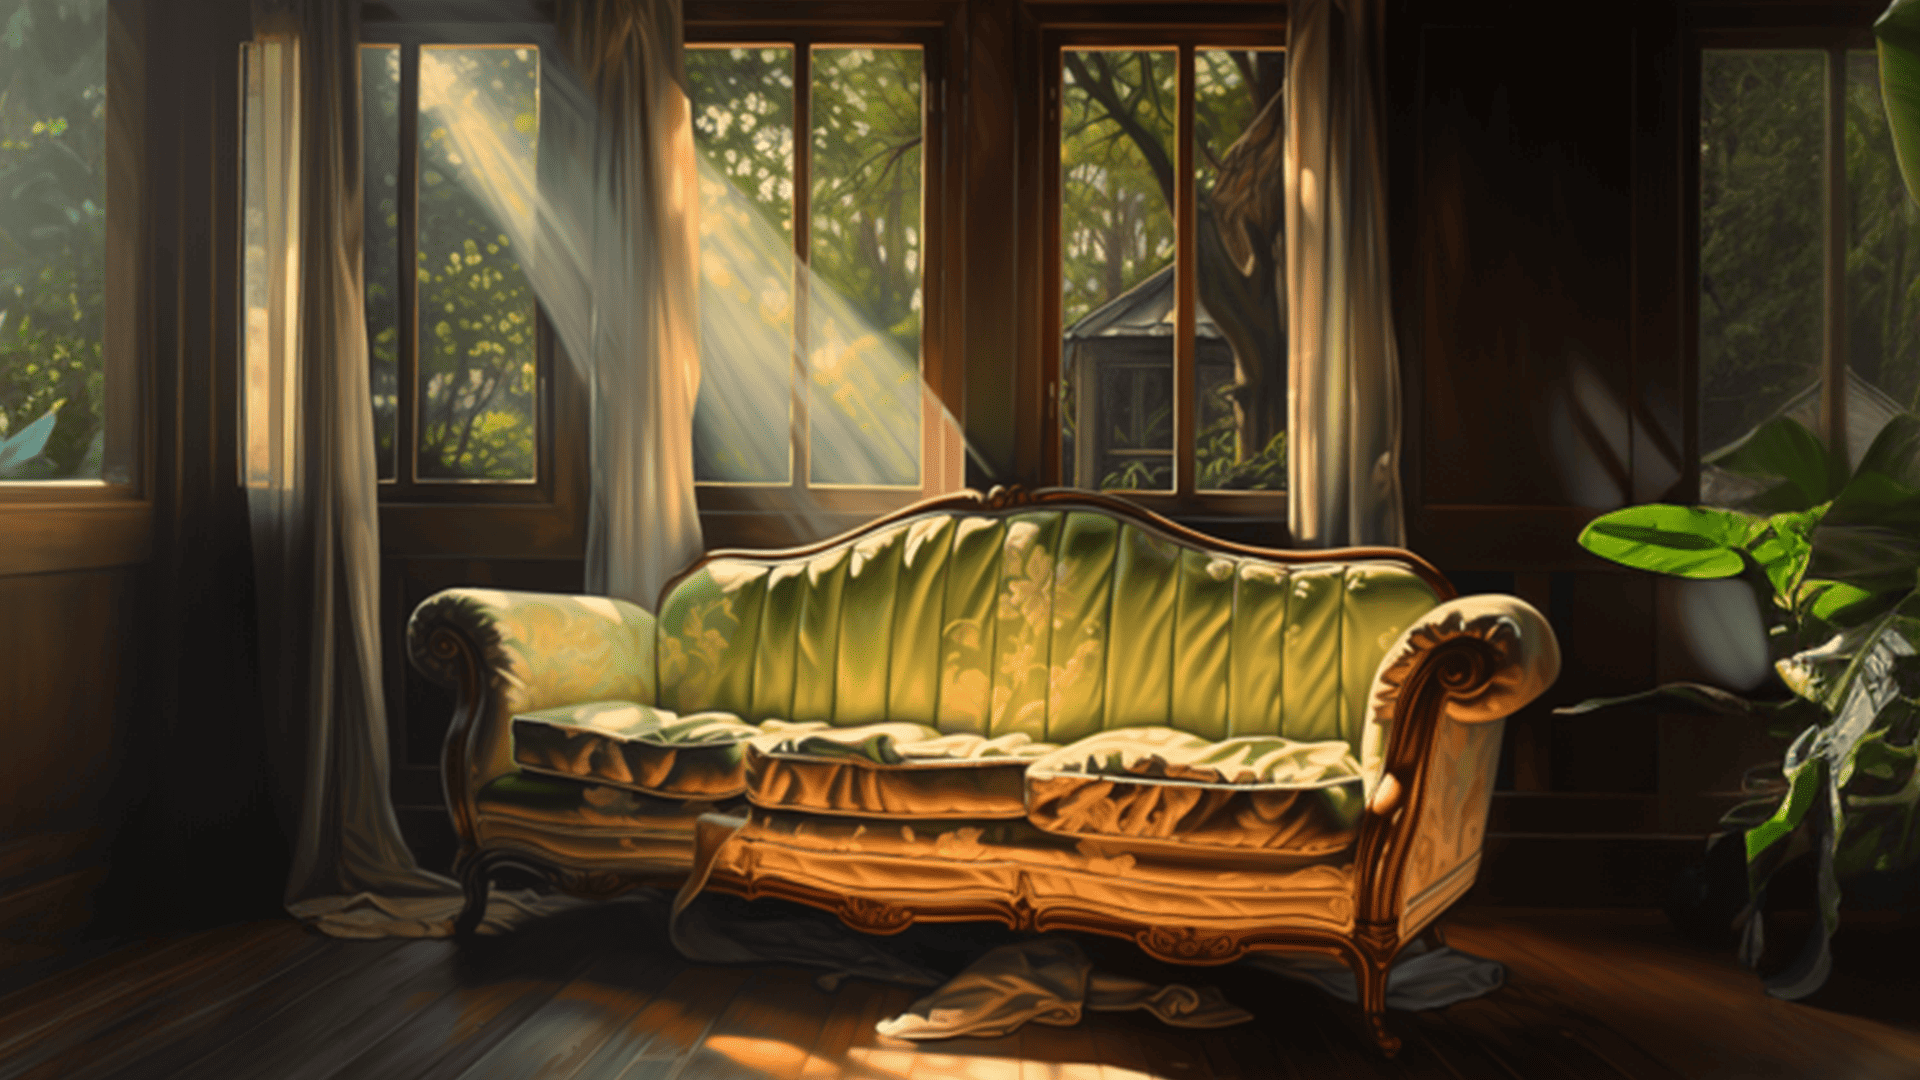 A beautiful traditional couch in a well lit sunny room in the woods